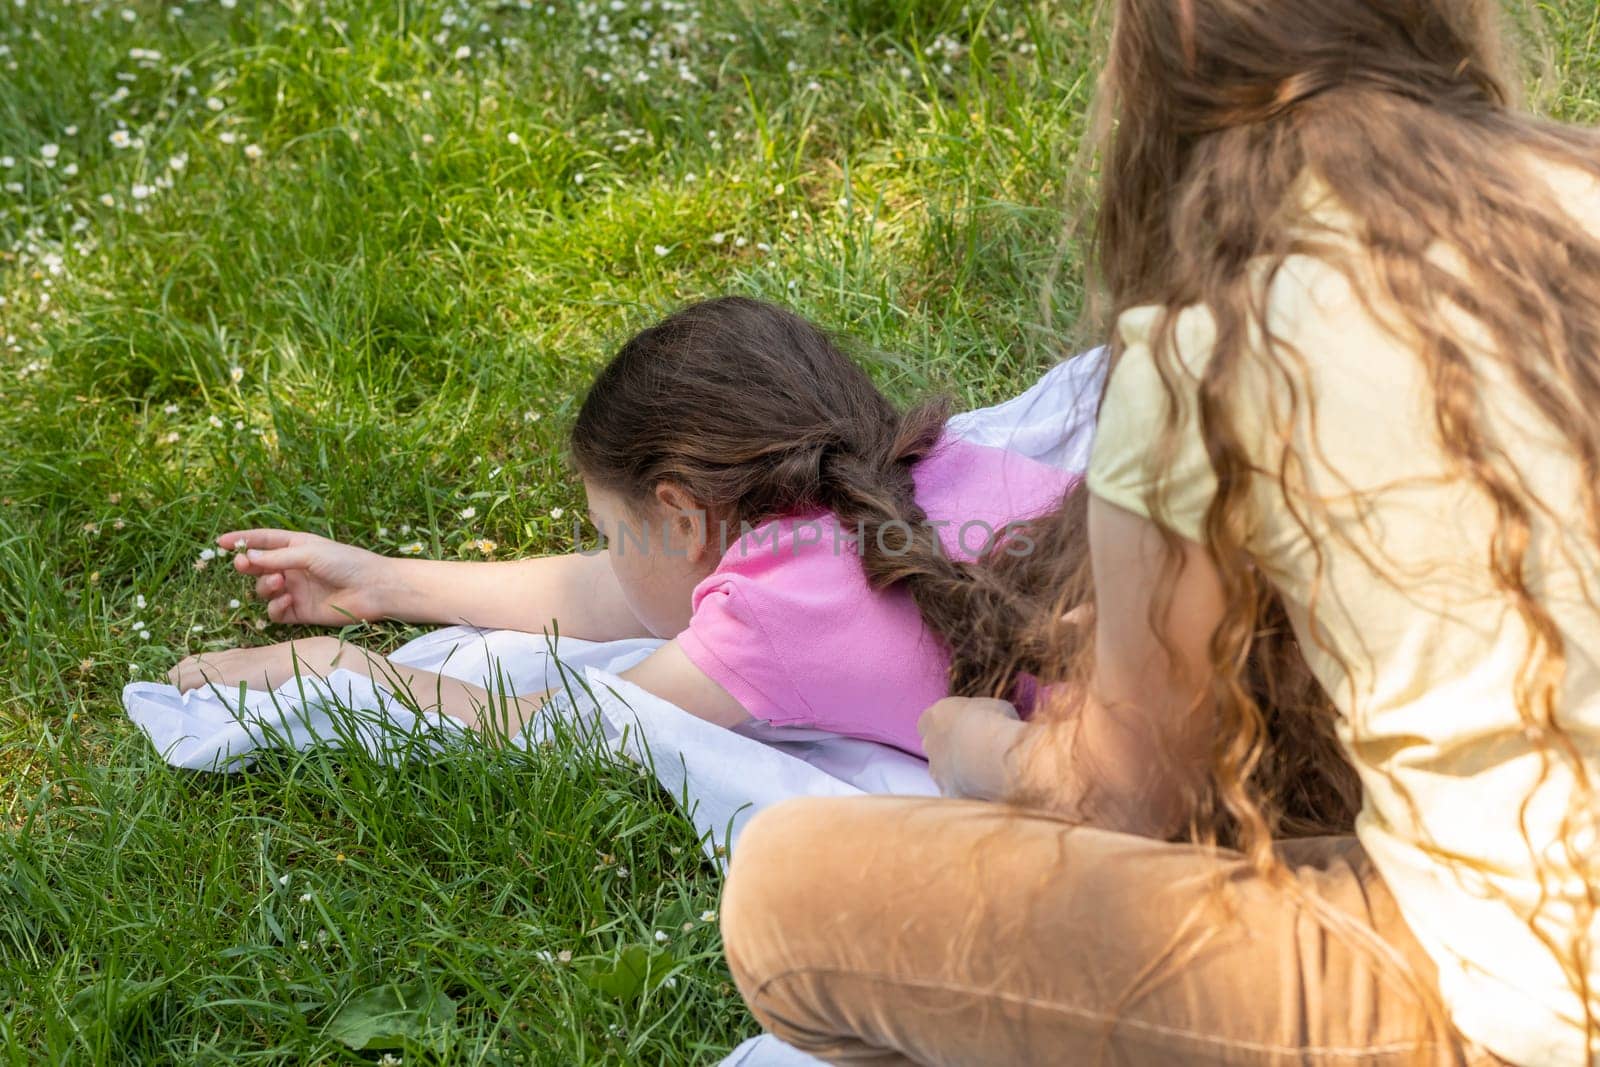 View From Back Little Girl With Long Hair braids Sister's Hair Sitting On Grass in Meadow At Sunny Day. Siblings Love, Carefree Time, True Friendship, Family Lifestyle. School Break. Horizontal Plane